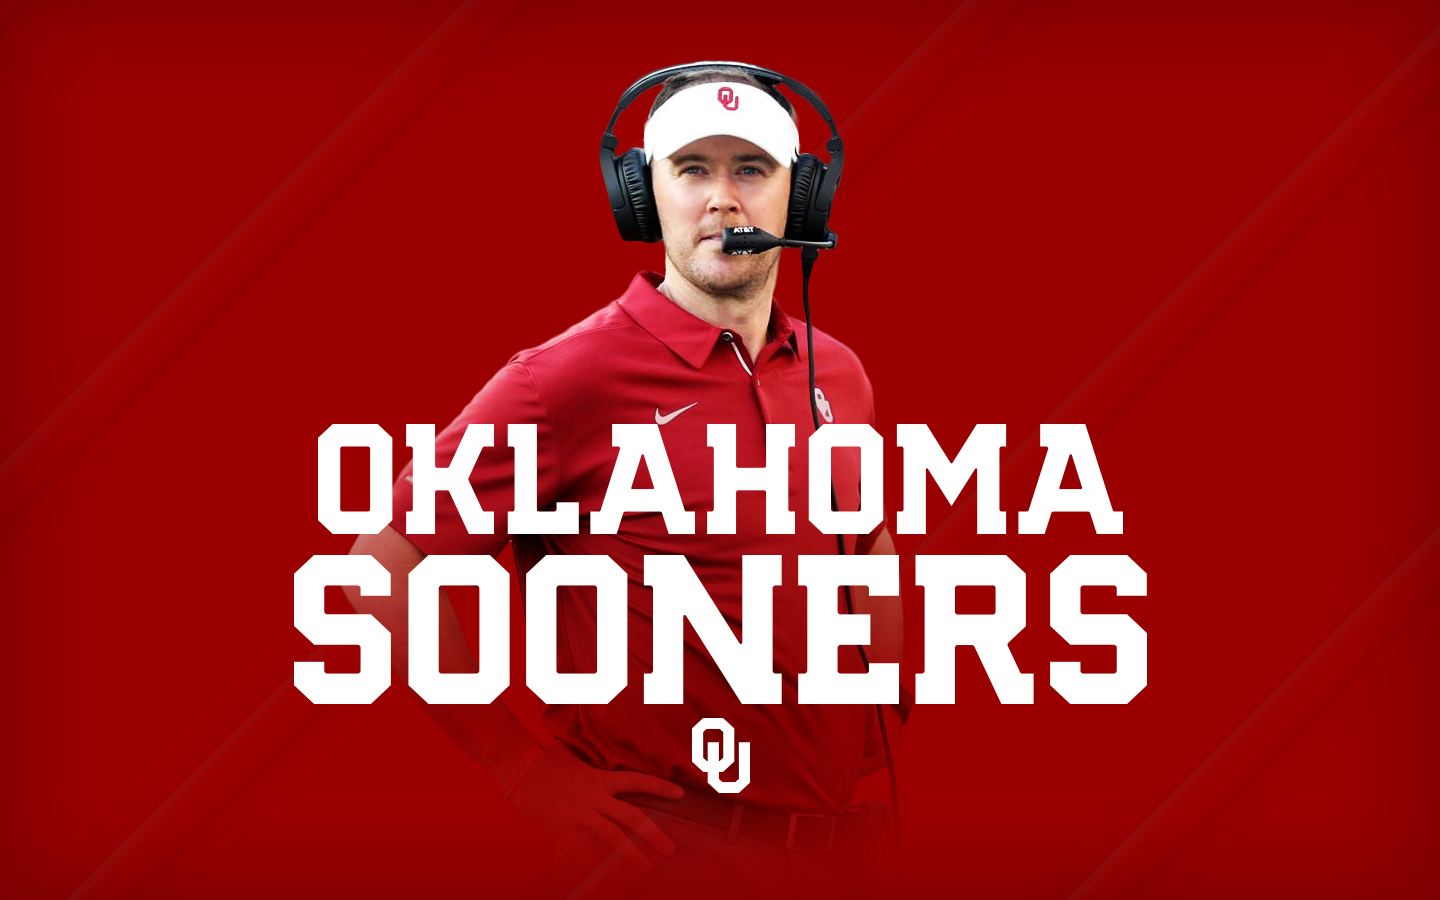 Oukingpen Wallpaper And More For Sooner Nation